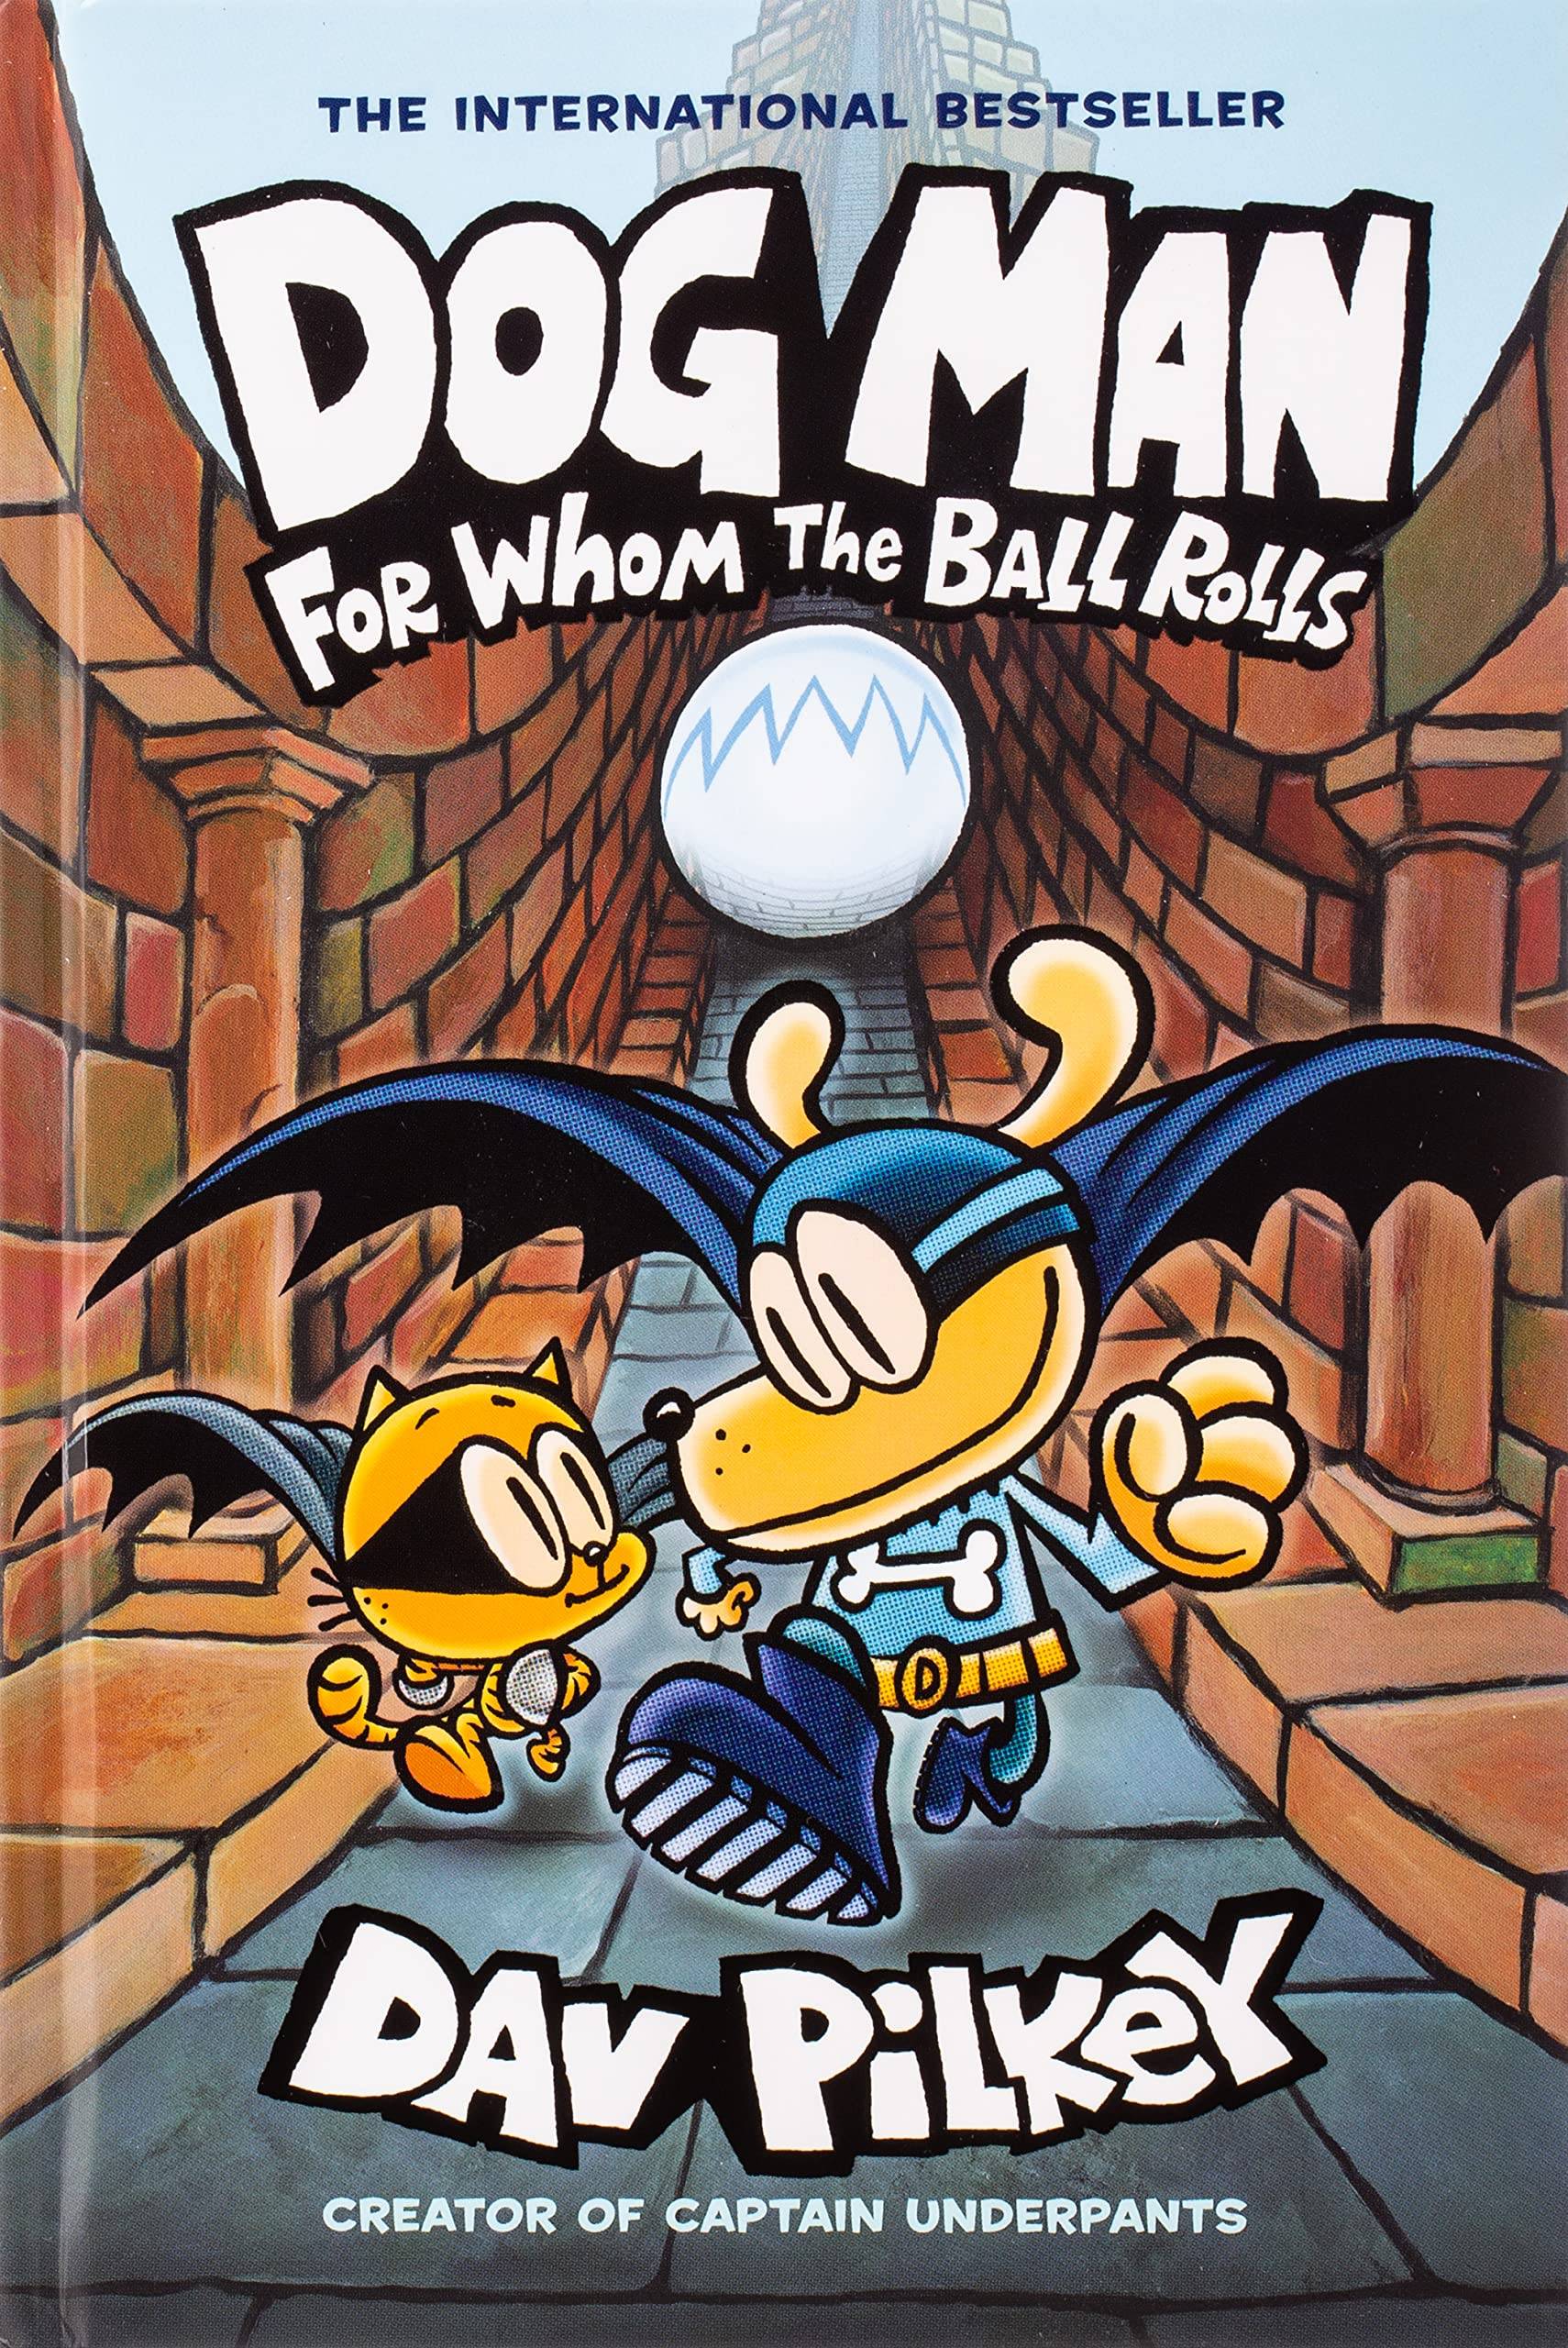 IMG : Dogman For Whom The Ball Rolls #7